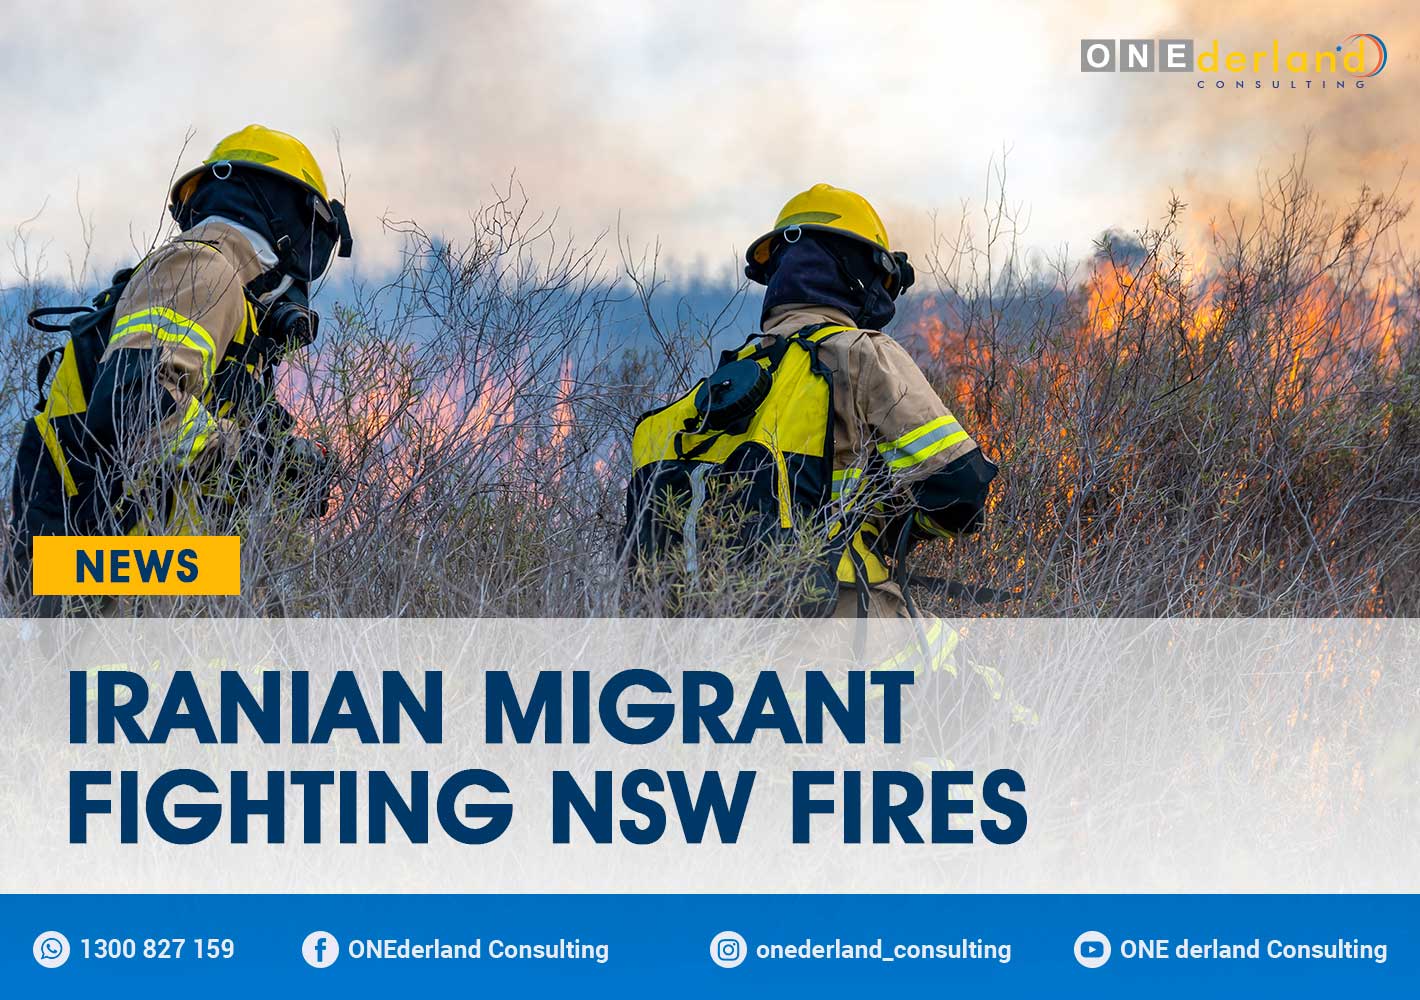 Iranian Migrant Fighting NSW Fires